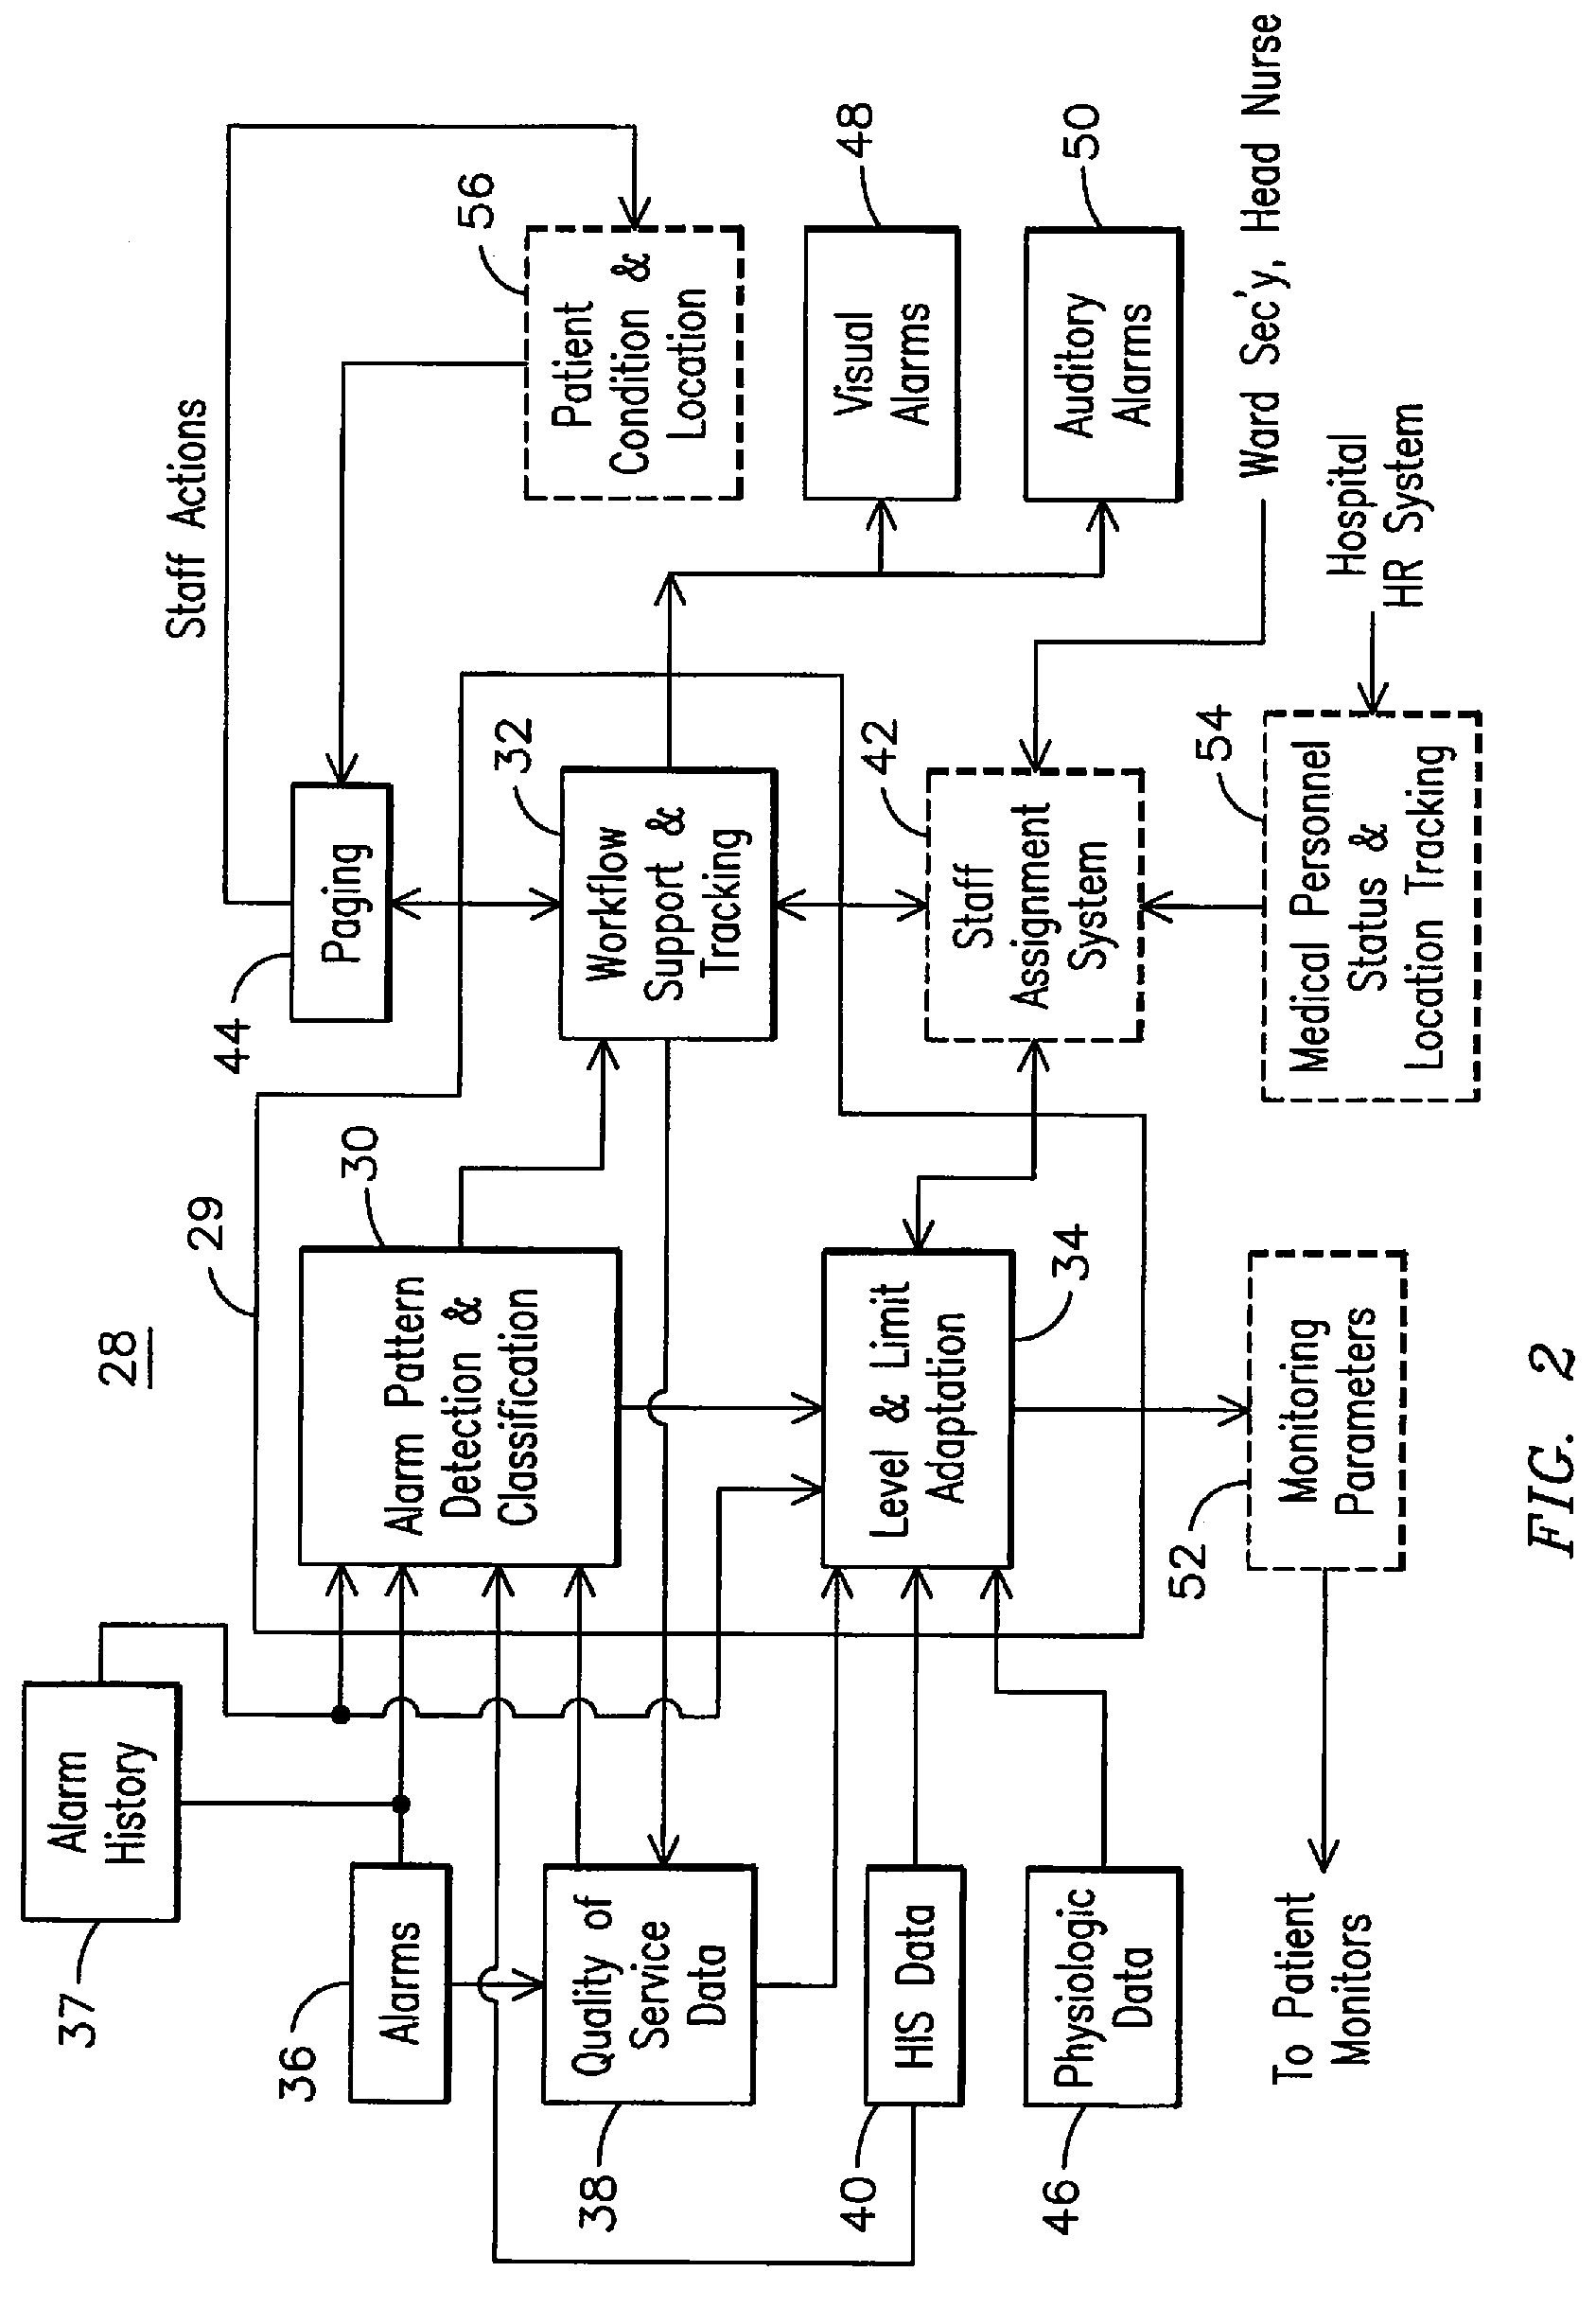 System and Method For Providing Centralized Physiological Monitoring